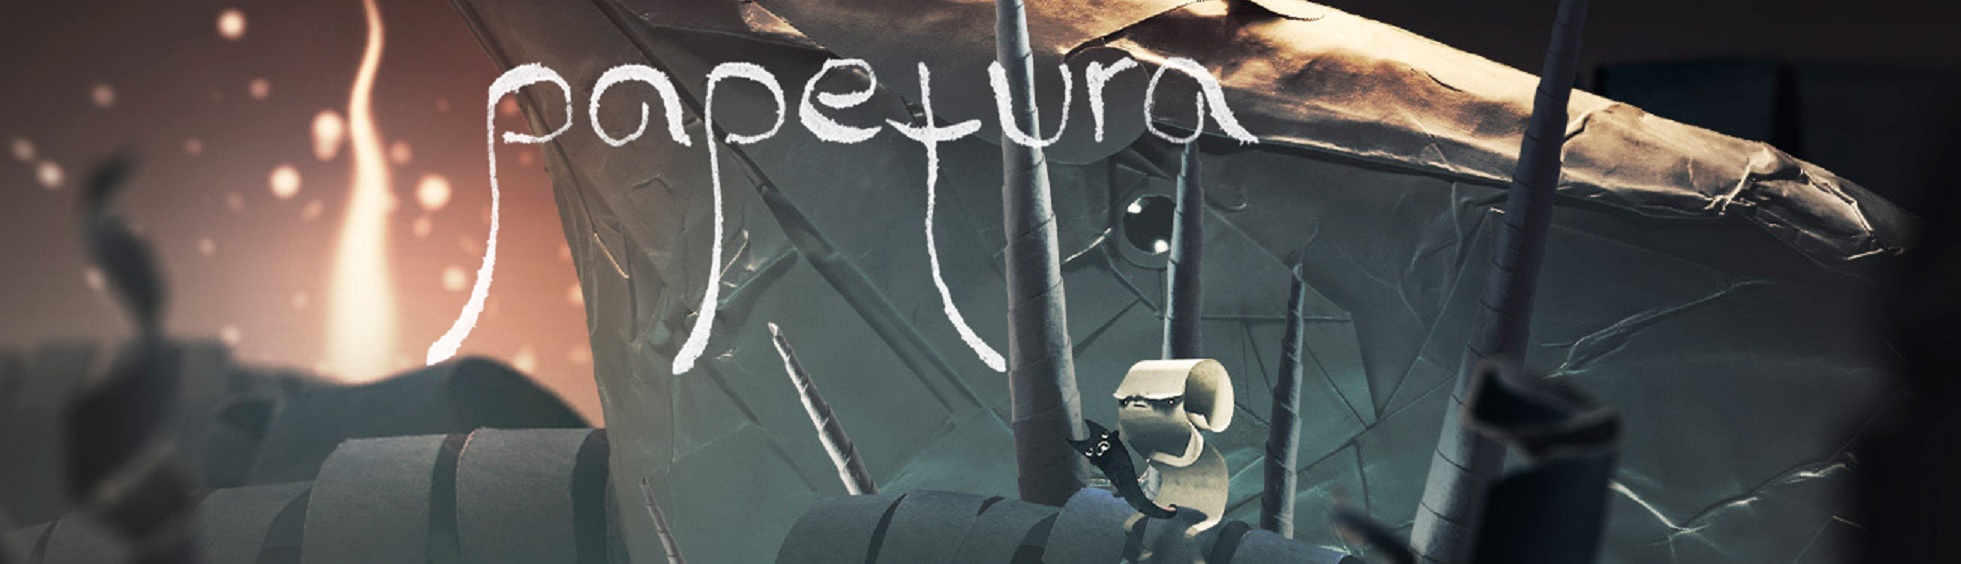 Papetura is a unique point and click adventure game made using paper, it's funding on IndieGogo.